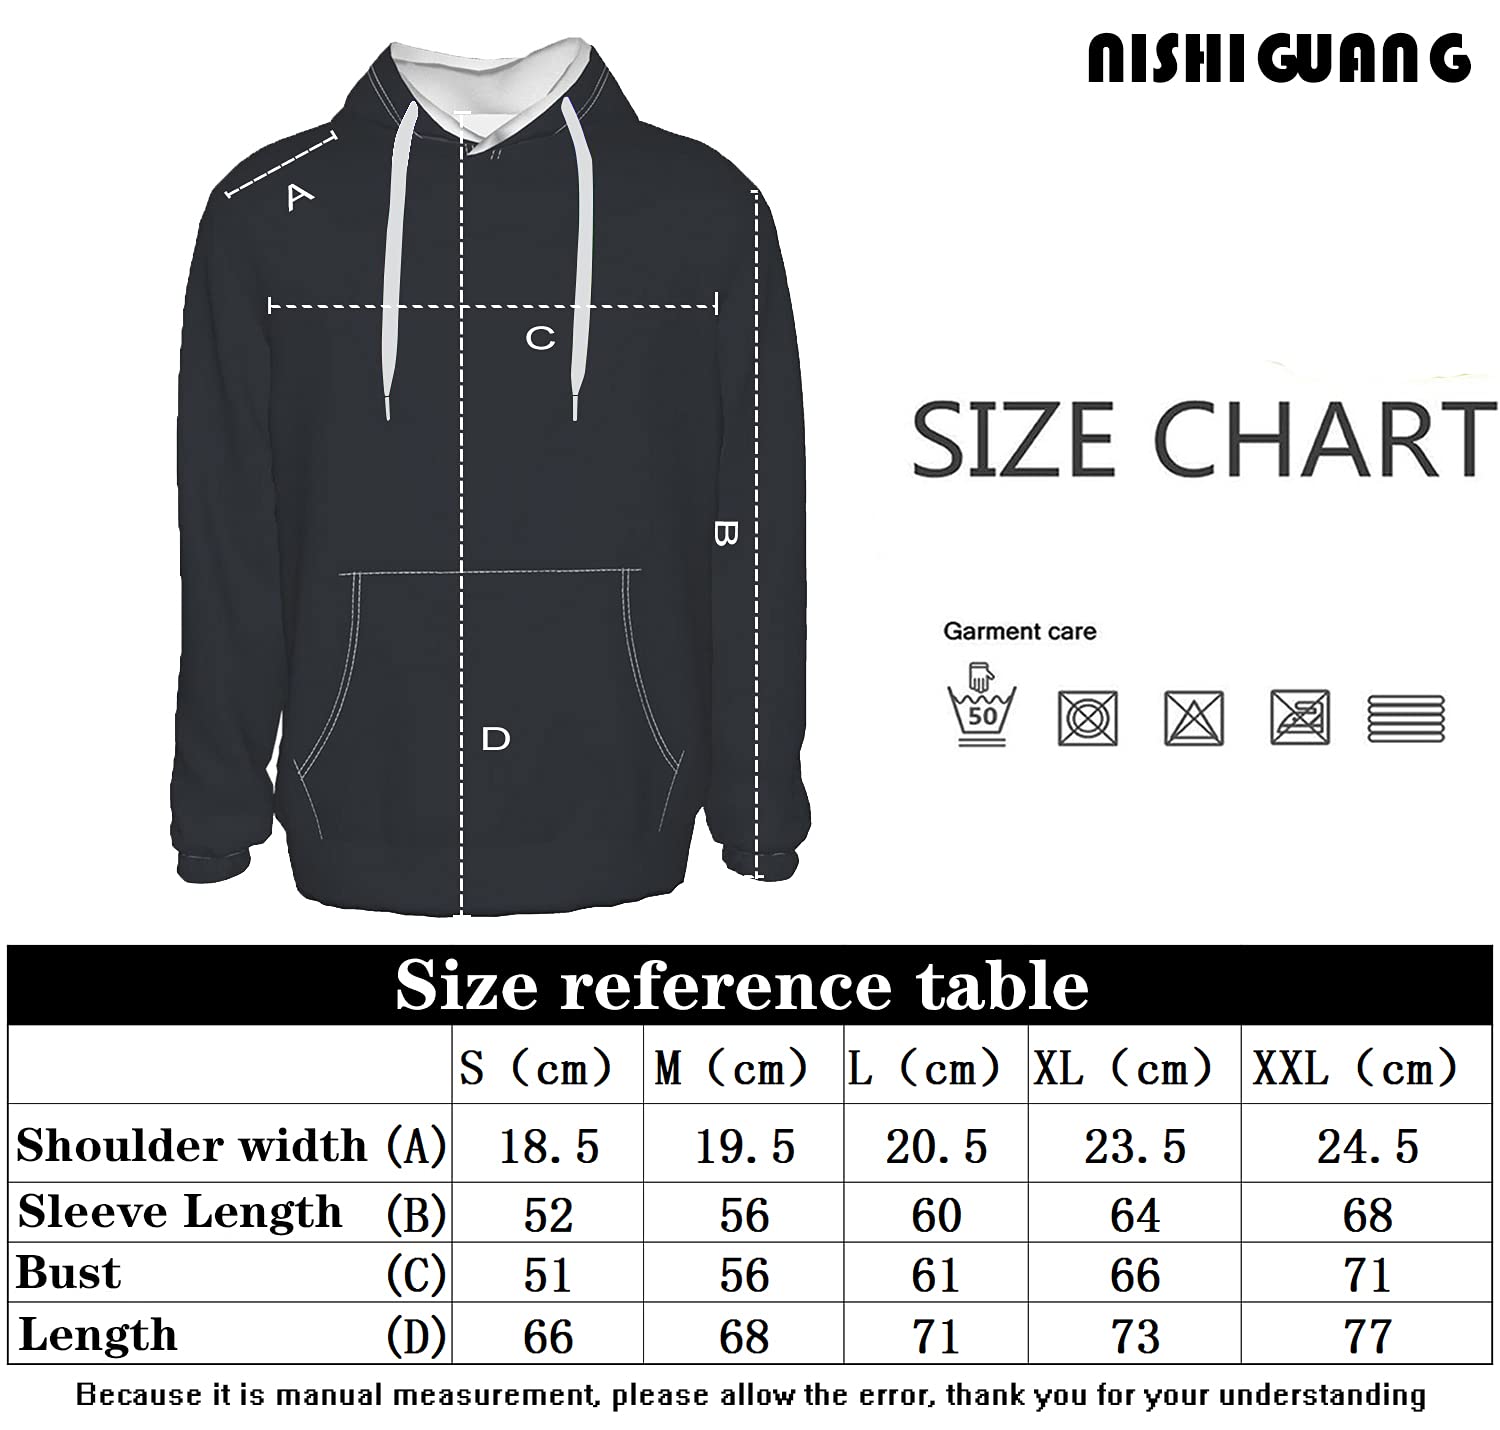 Men's Youth 3D Novelty Fashion Hoodie Graphic Print Animal Hoodie Pullover Sweatshirt with large pockets